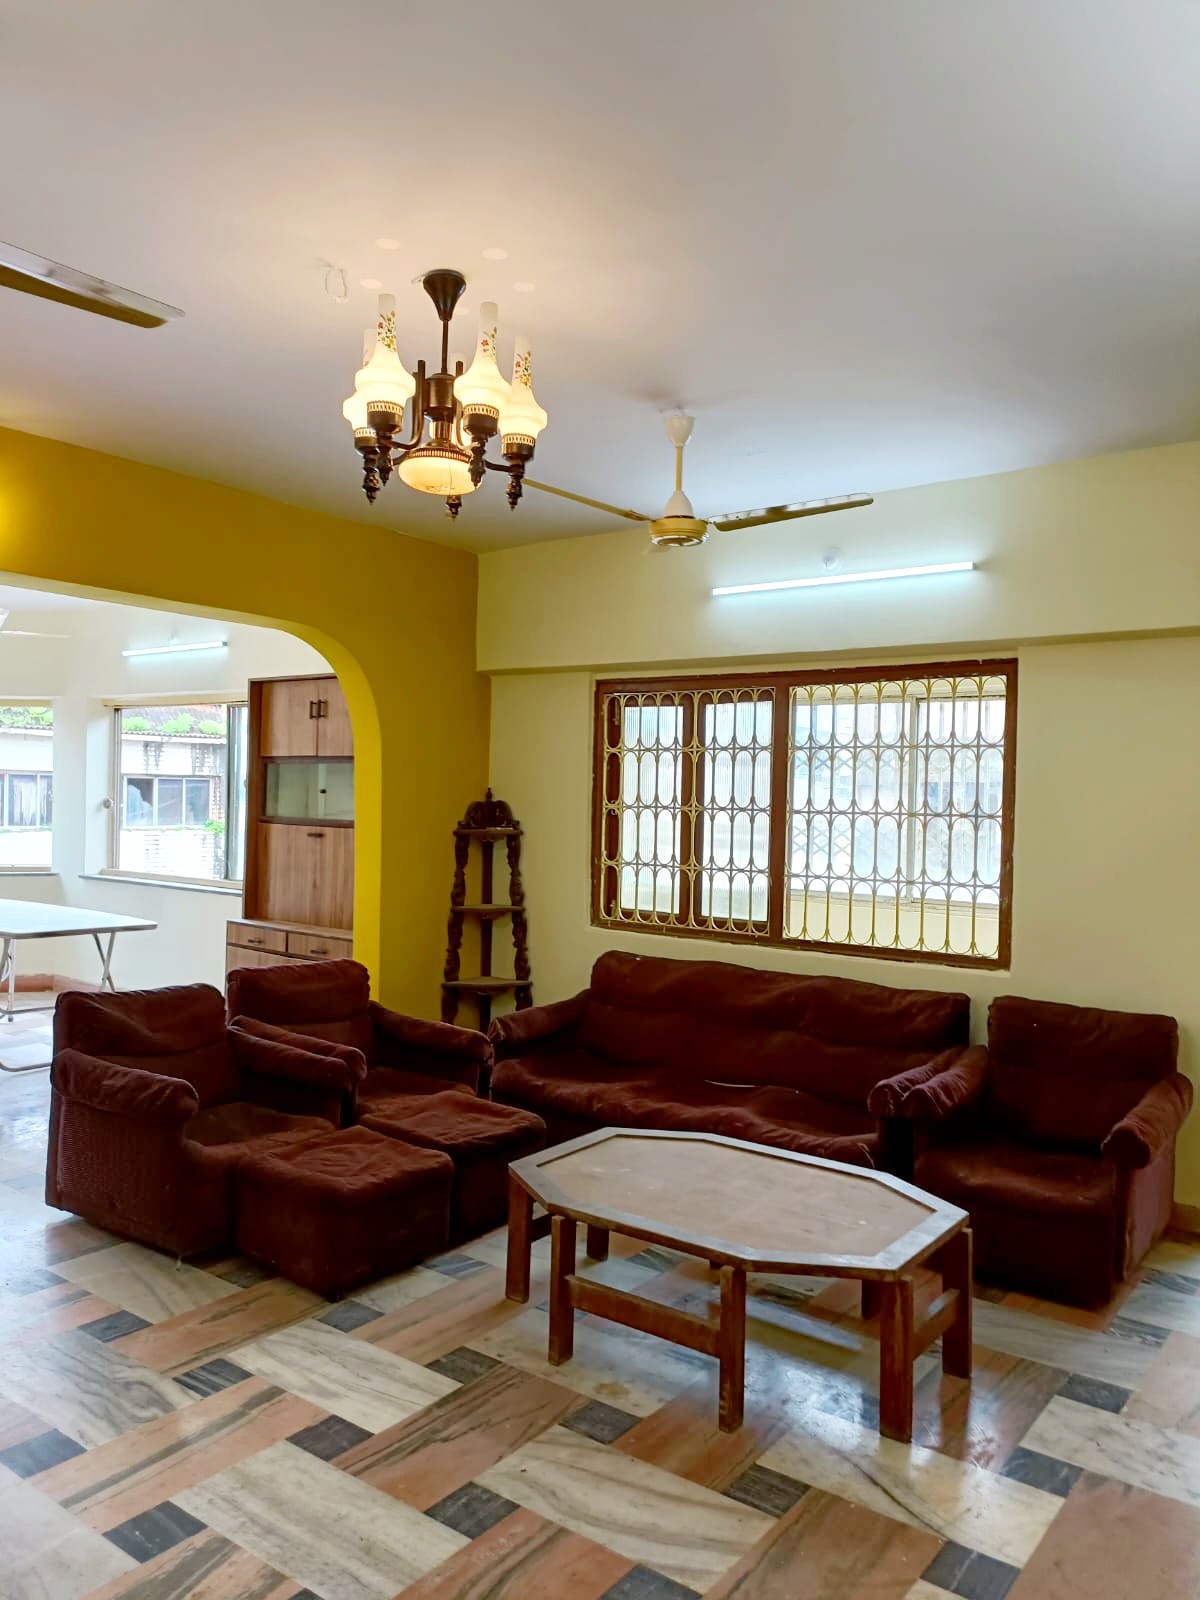 4 Bed/ 4 Bath Rent Apartment/ Flat; 17,200 sq. ft. carpet area, Semi Furnished for rent @Margao